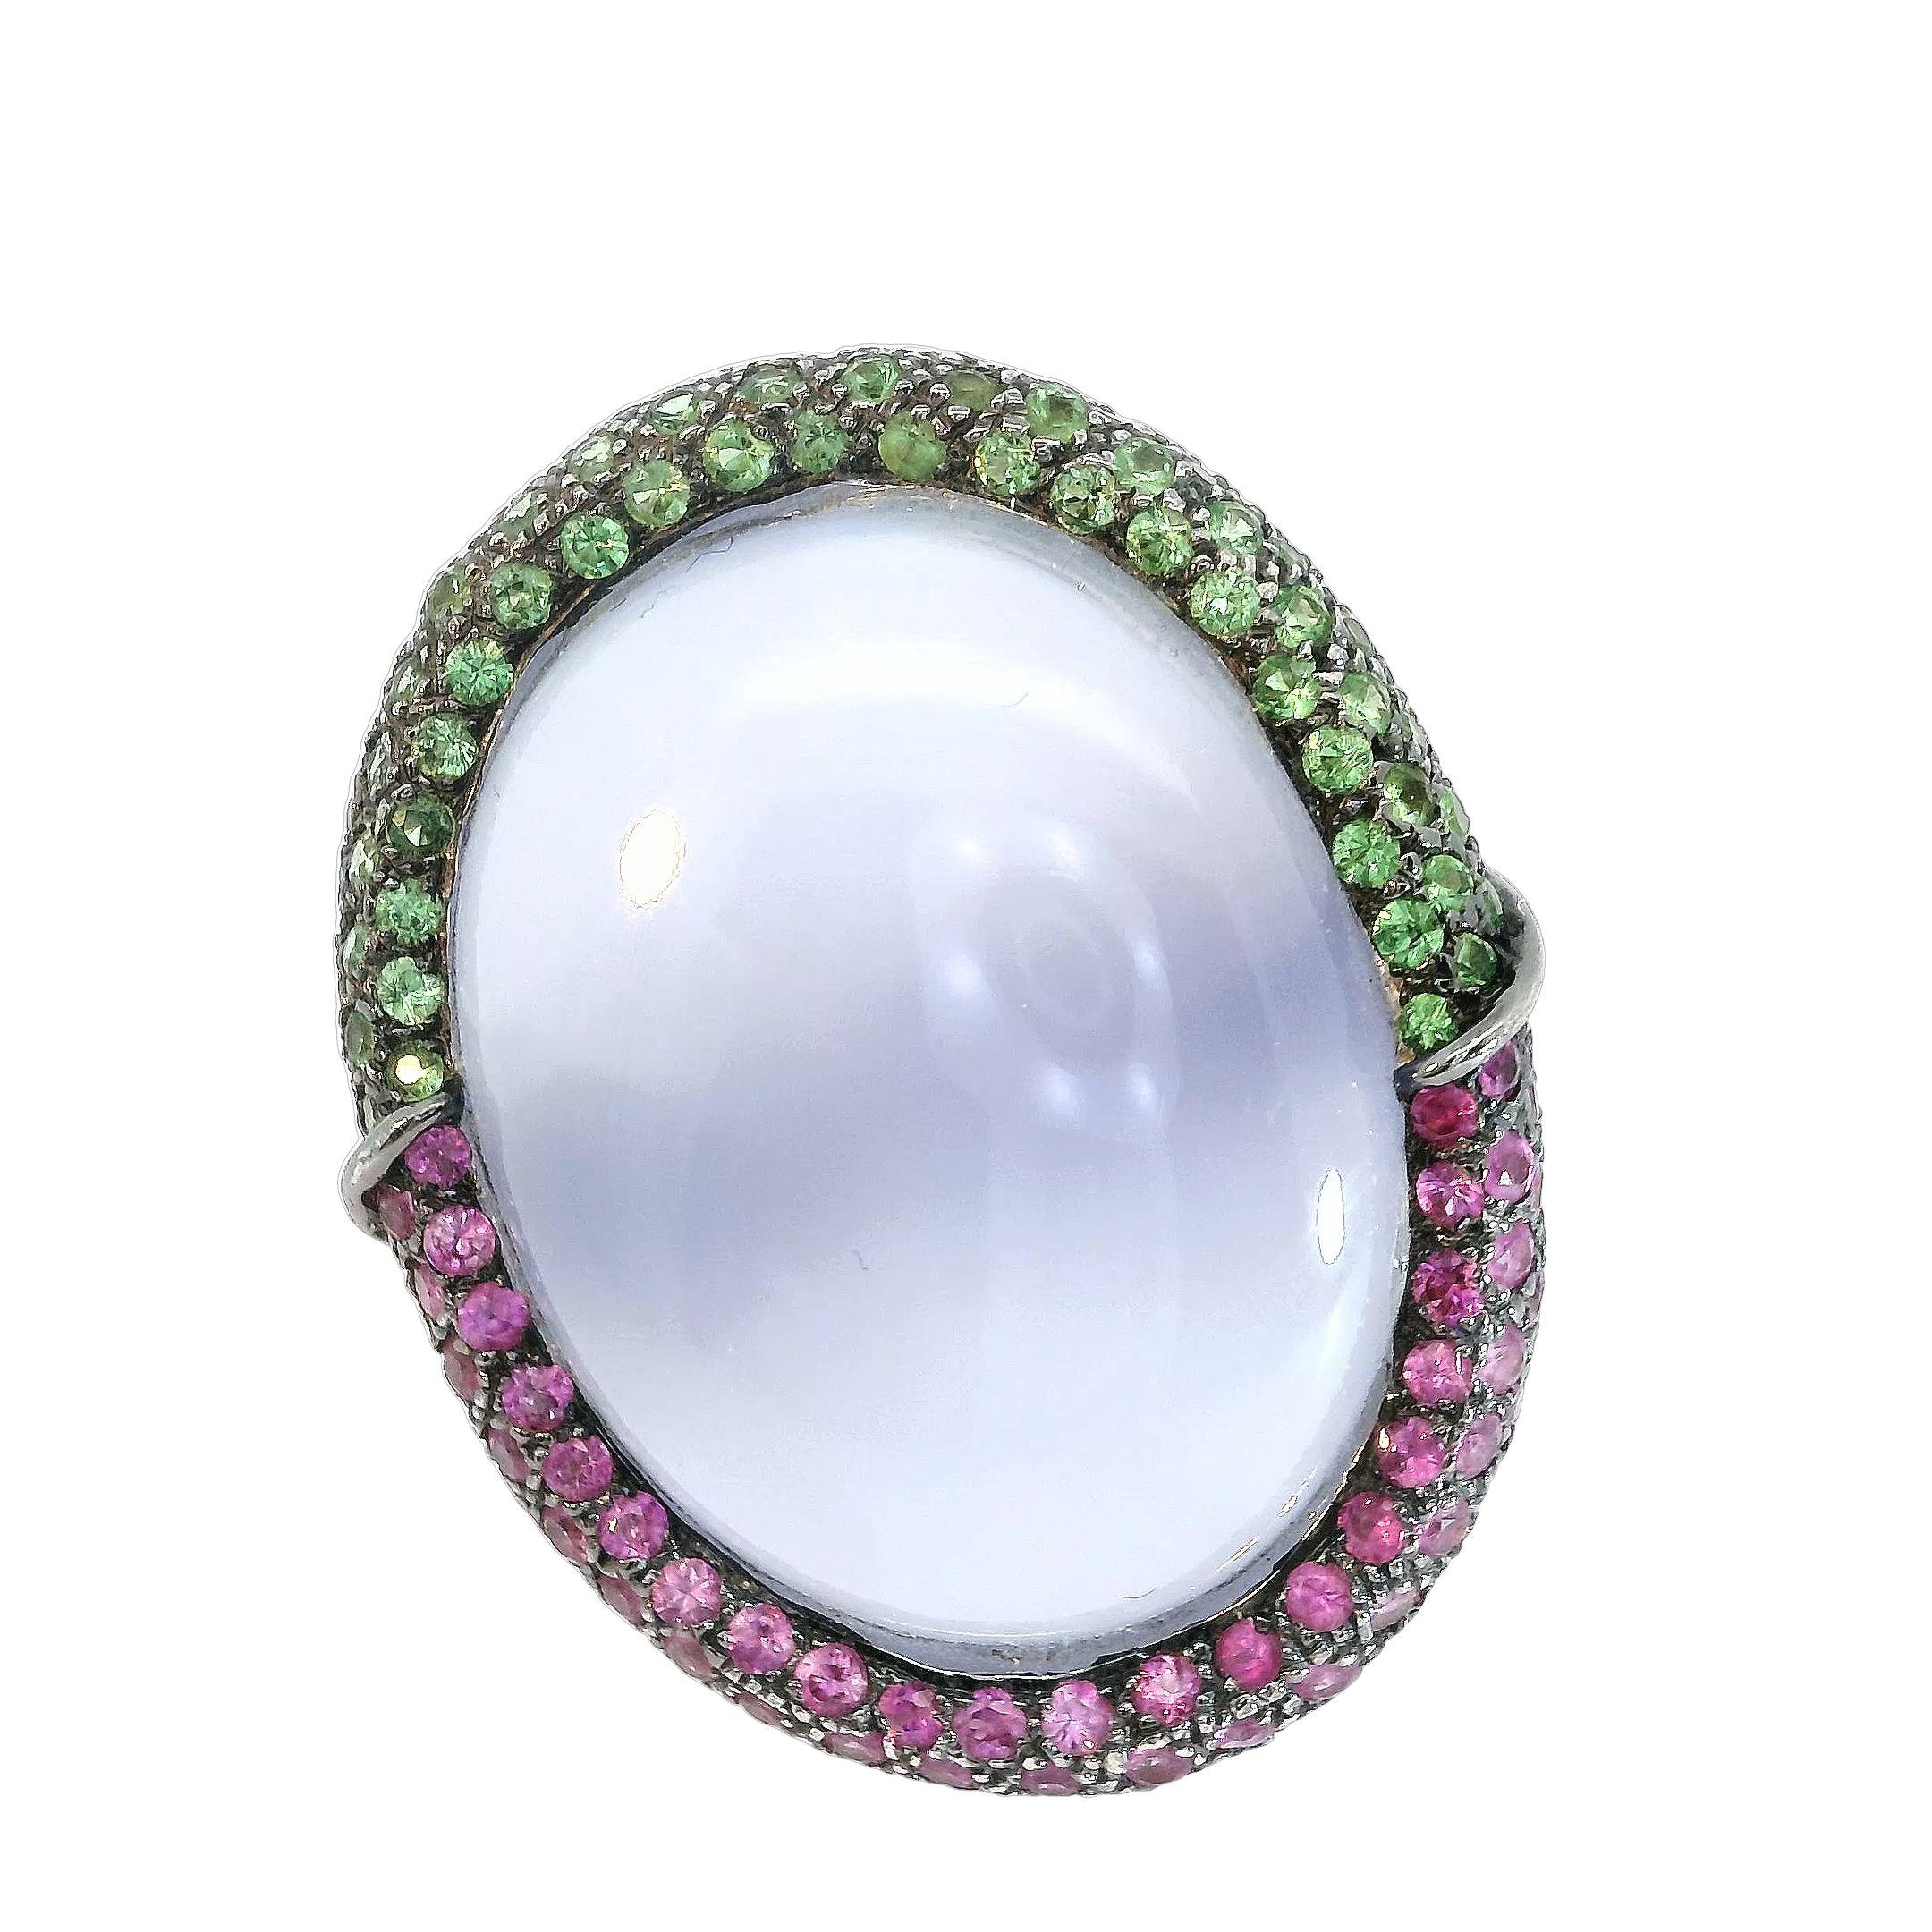 Introducing the epitome of elegance and sophistication - the mesmerizing Chalcedony Halo Ring. Prepare to be captivated by the sheer beauty and undeniable allure of this exquisite piece of jewelry.

Crafted with utmost precision and attention to